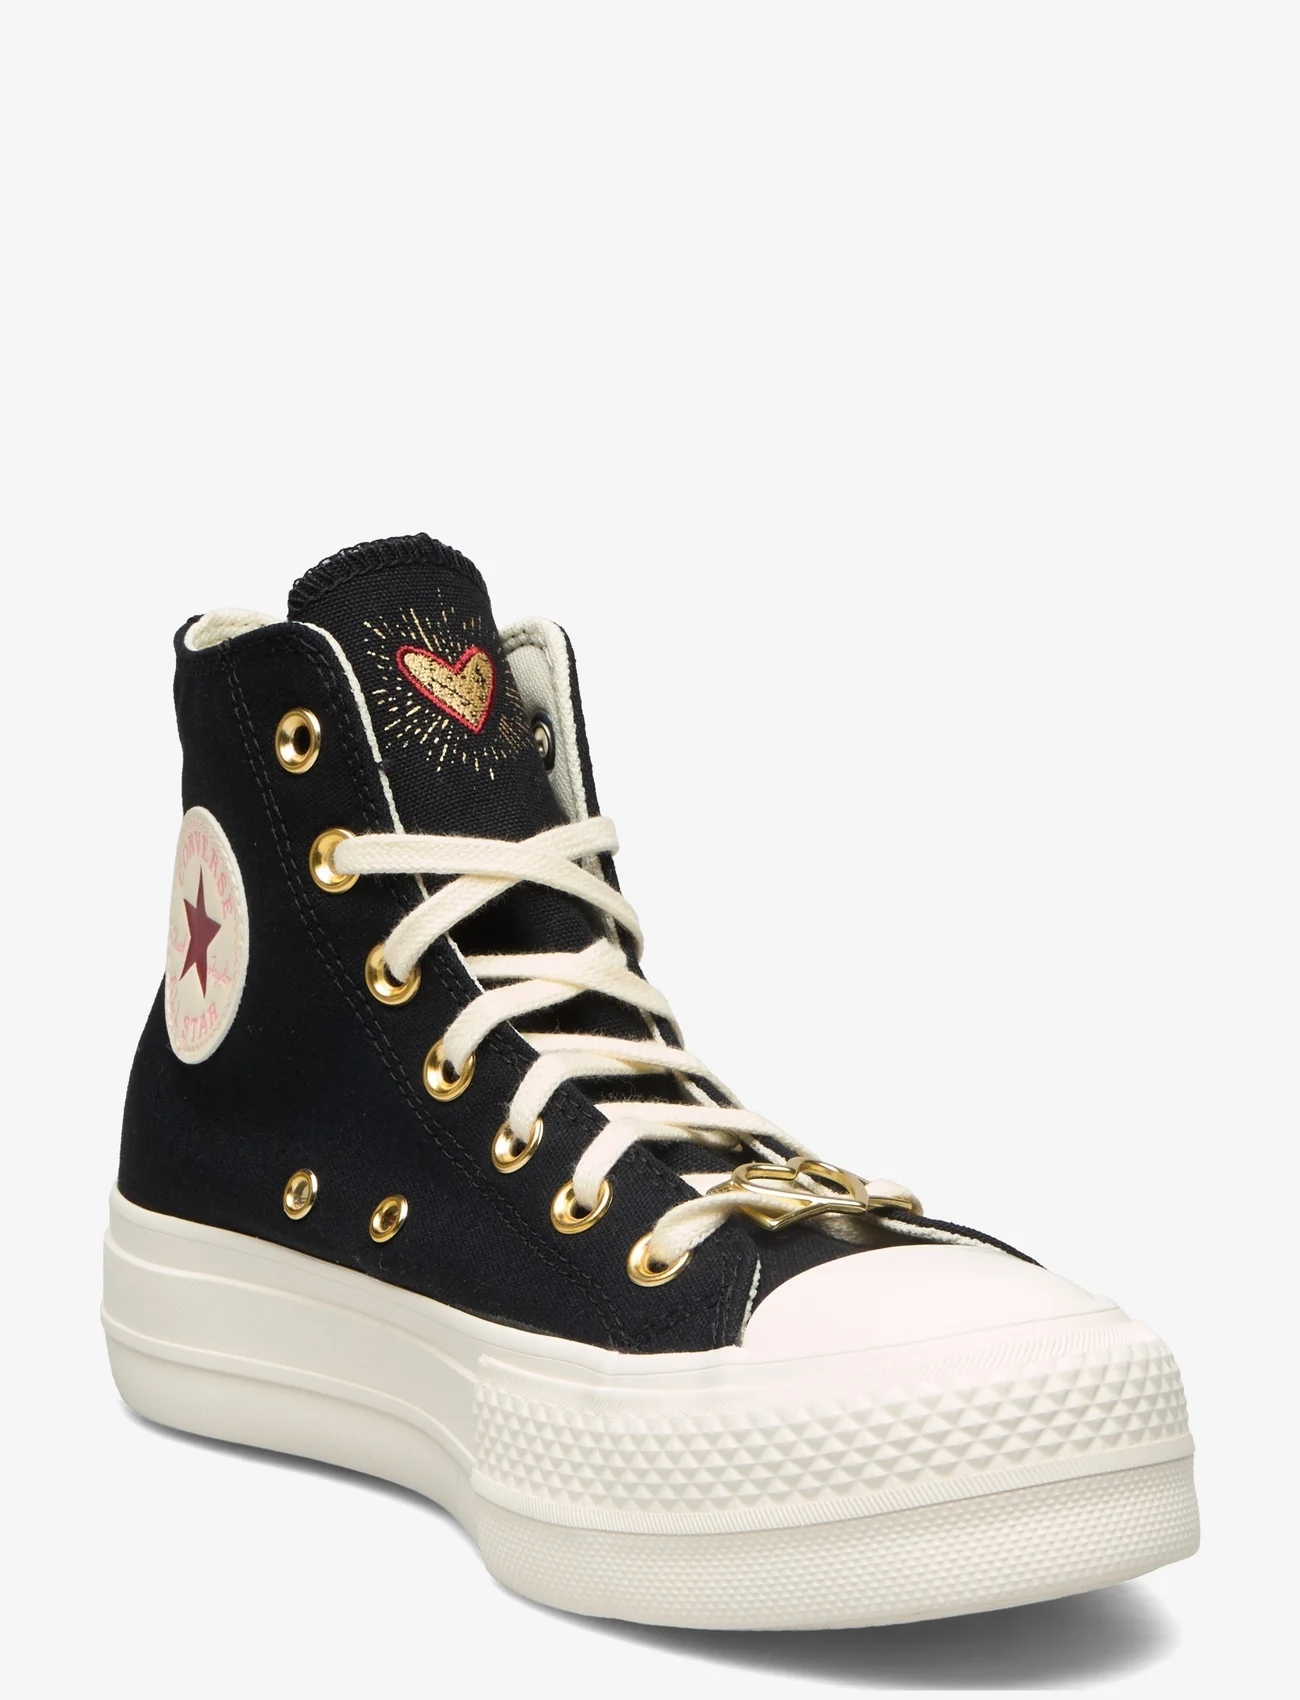 Converse Chuck Taylor All Star Lift (Black), ( €) | Large selection of  outlet-styles 